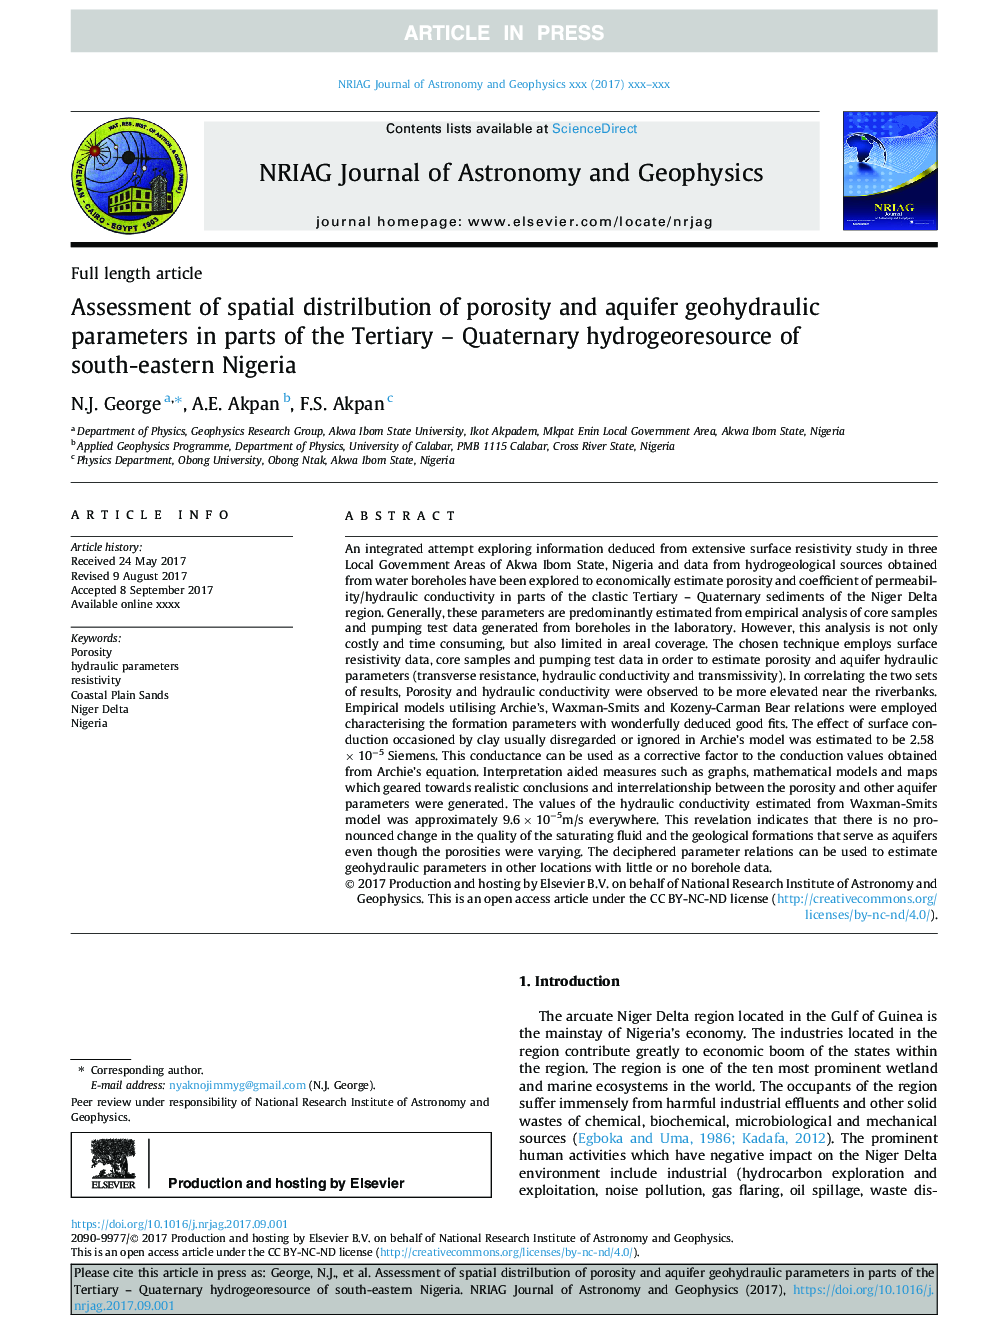 Assessment of spatial distrilbution of porosity and aquifer geohydraulic parameters in parts of the Tertiary - Quaternary hydrogeoresource of south-eastern Nigeria